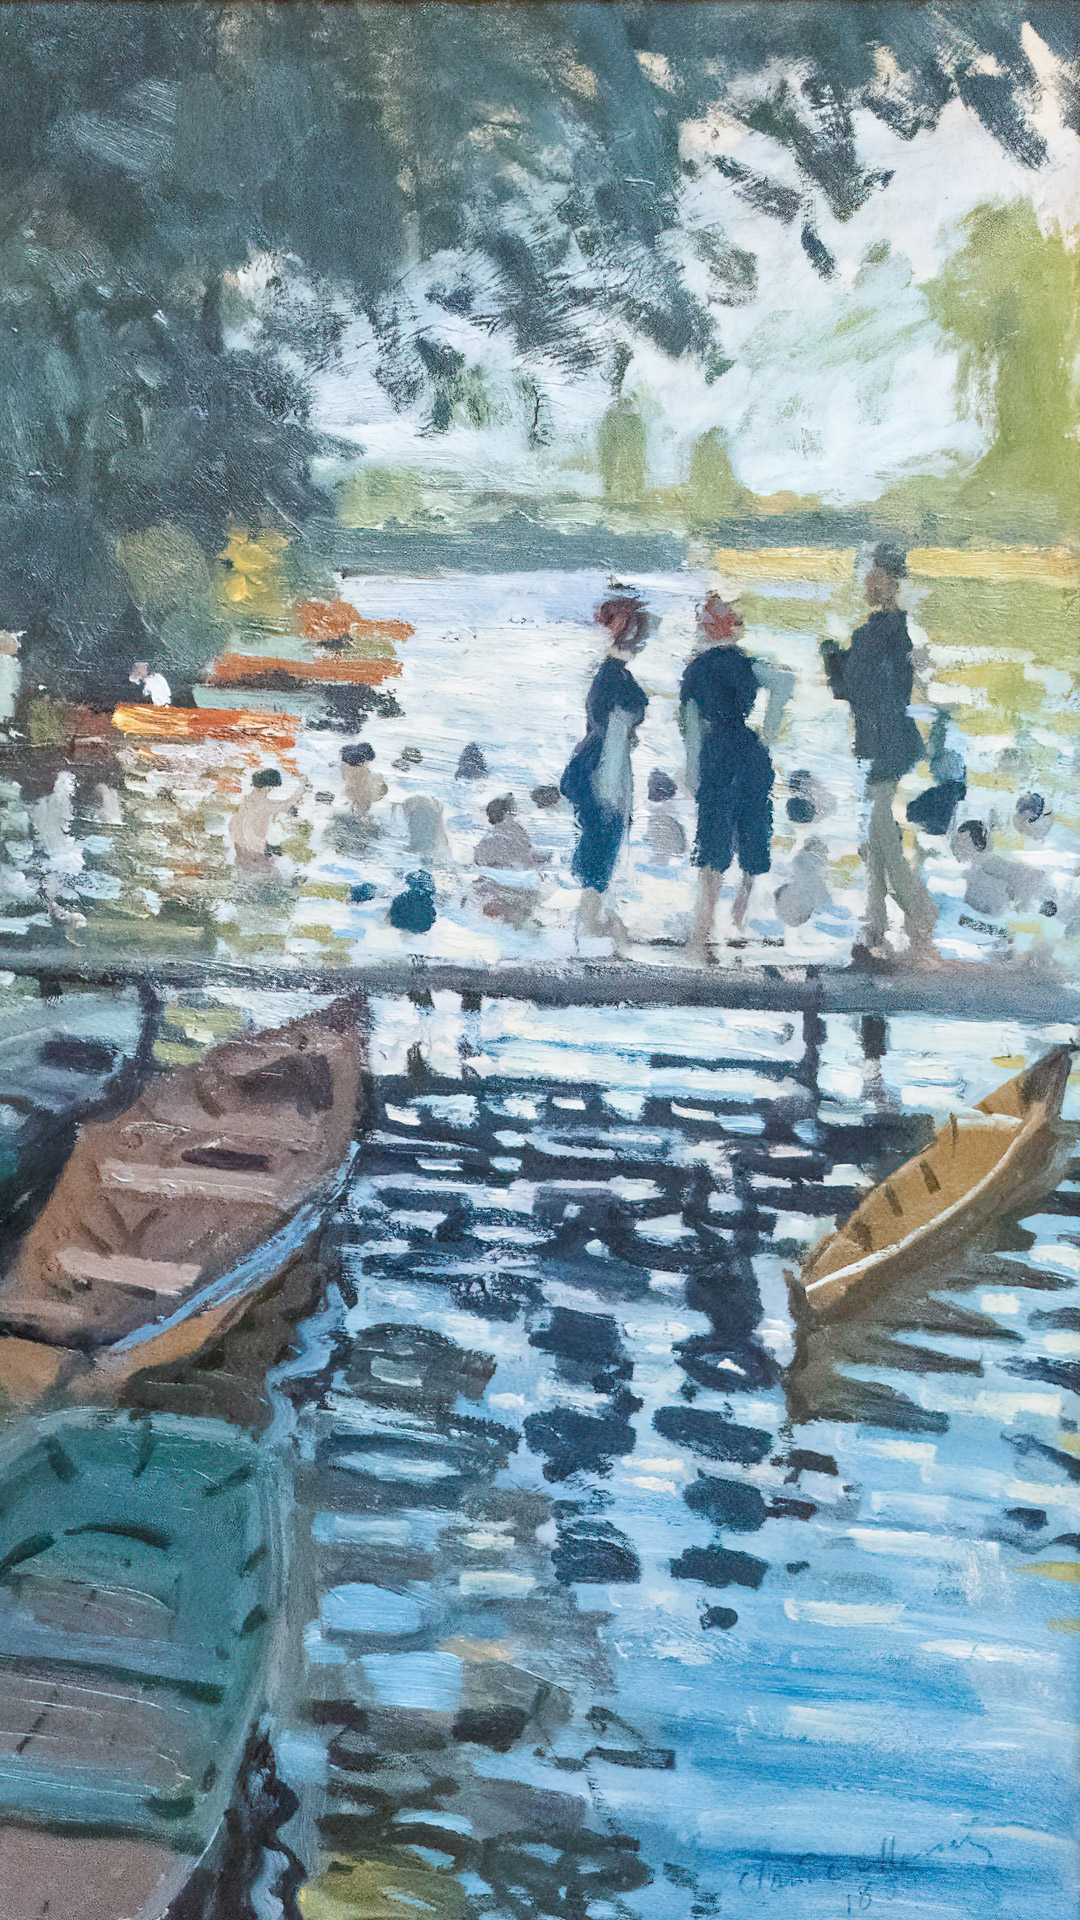 Bask in the leisurely charm of Bathers at La Grenouillère, where Monet's phone impressionism wallpaper captures the joy of riverside recreation.